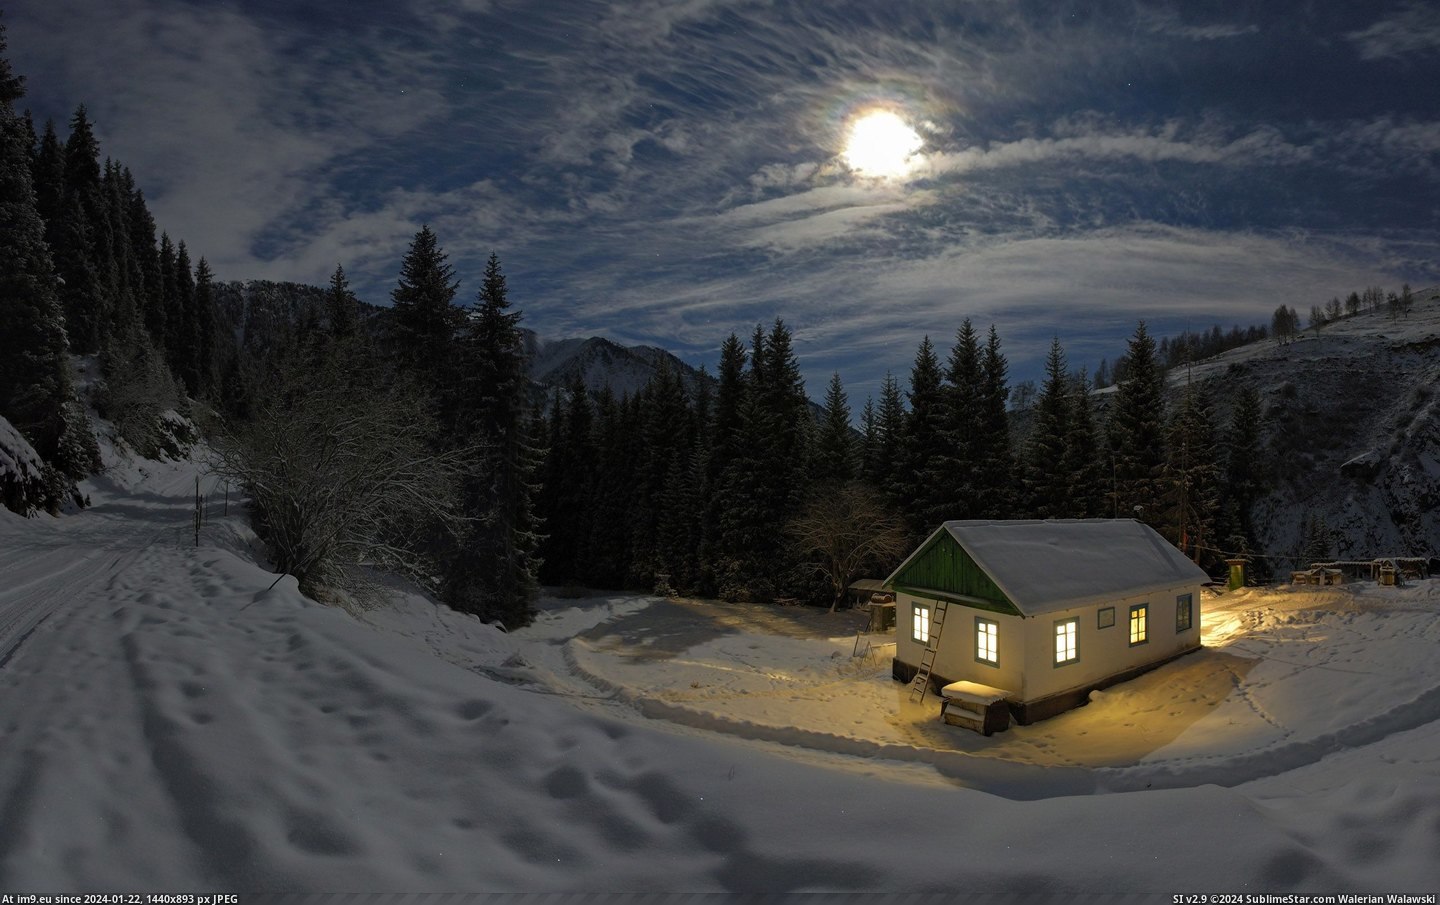 #Wallpaper #House #Moon #Wide #Cold Cold Moon House Wide HD Wallpaper Pic. (Obraz z album Unique HD Wallpapers))